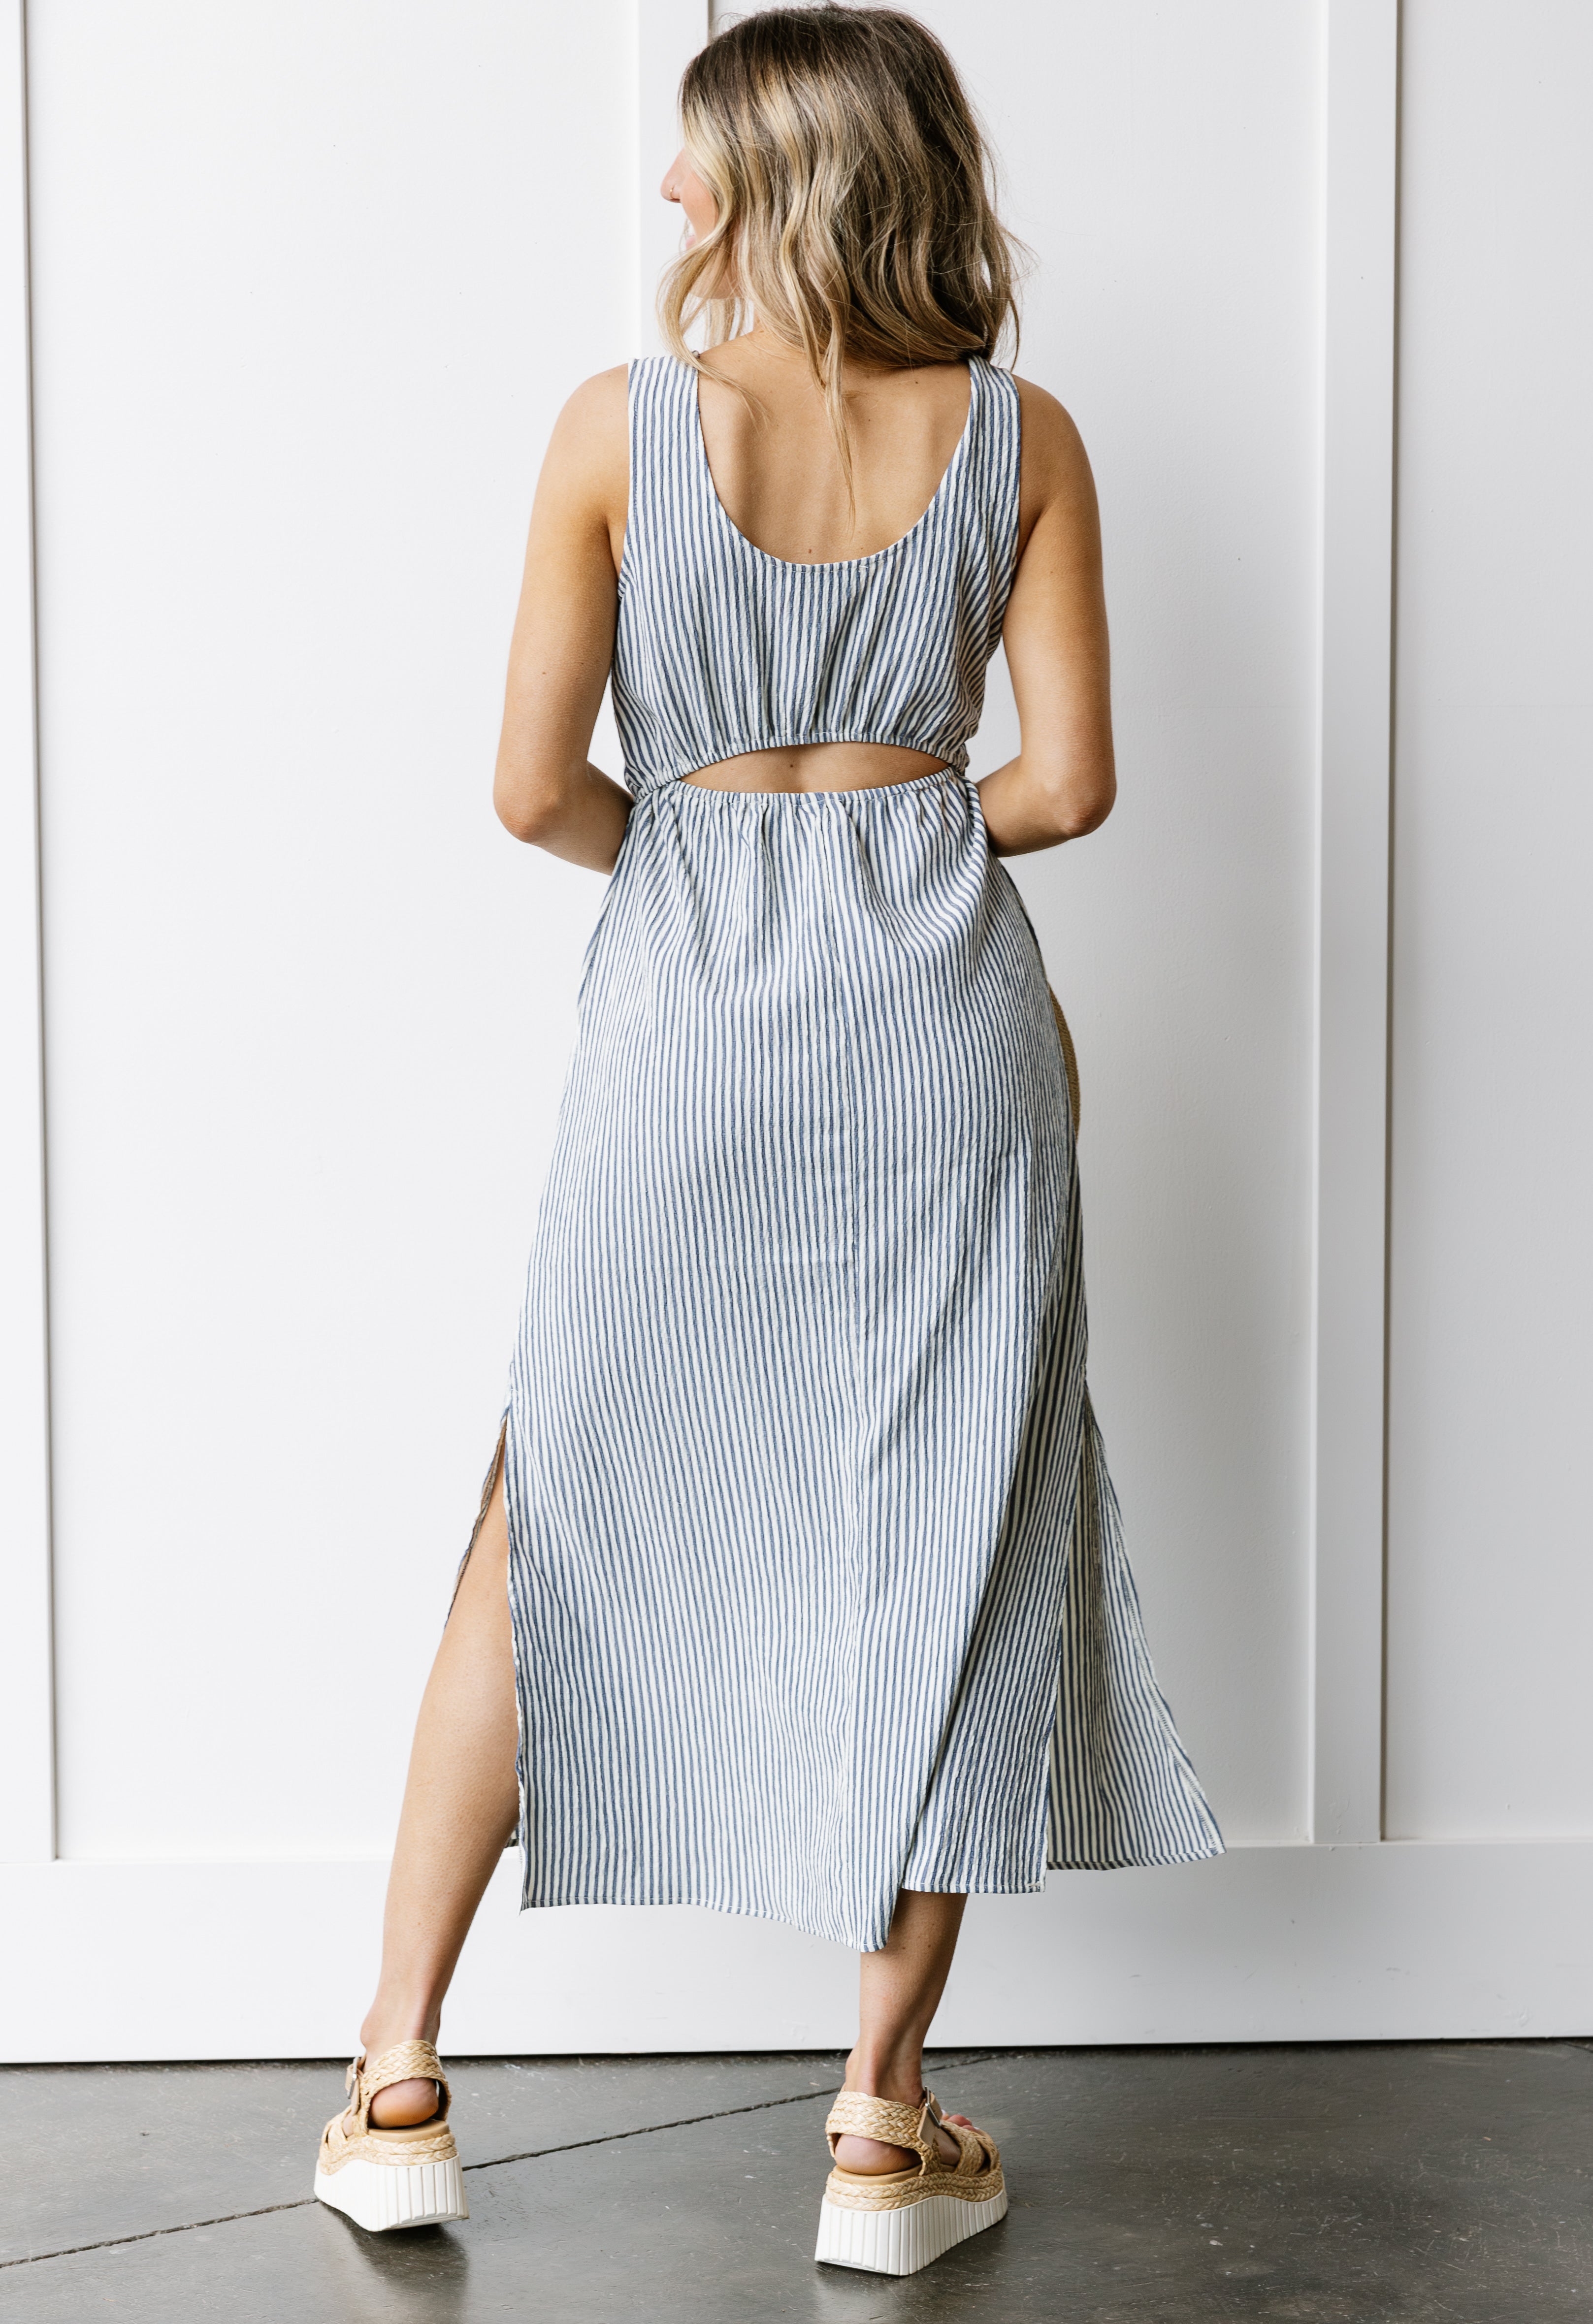 Dixie Dress - IVORY/NAVY - willows clothing Long Dress